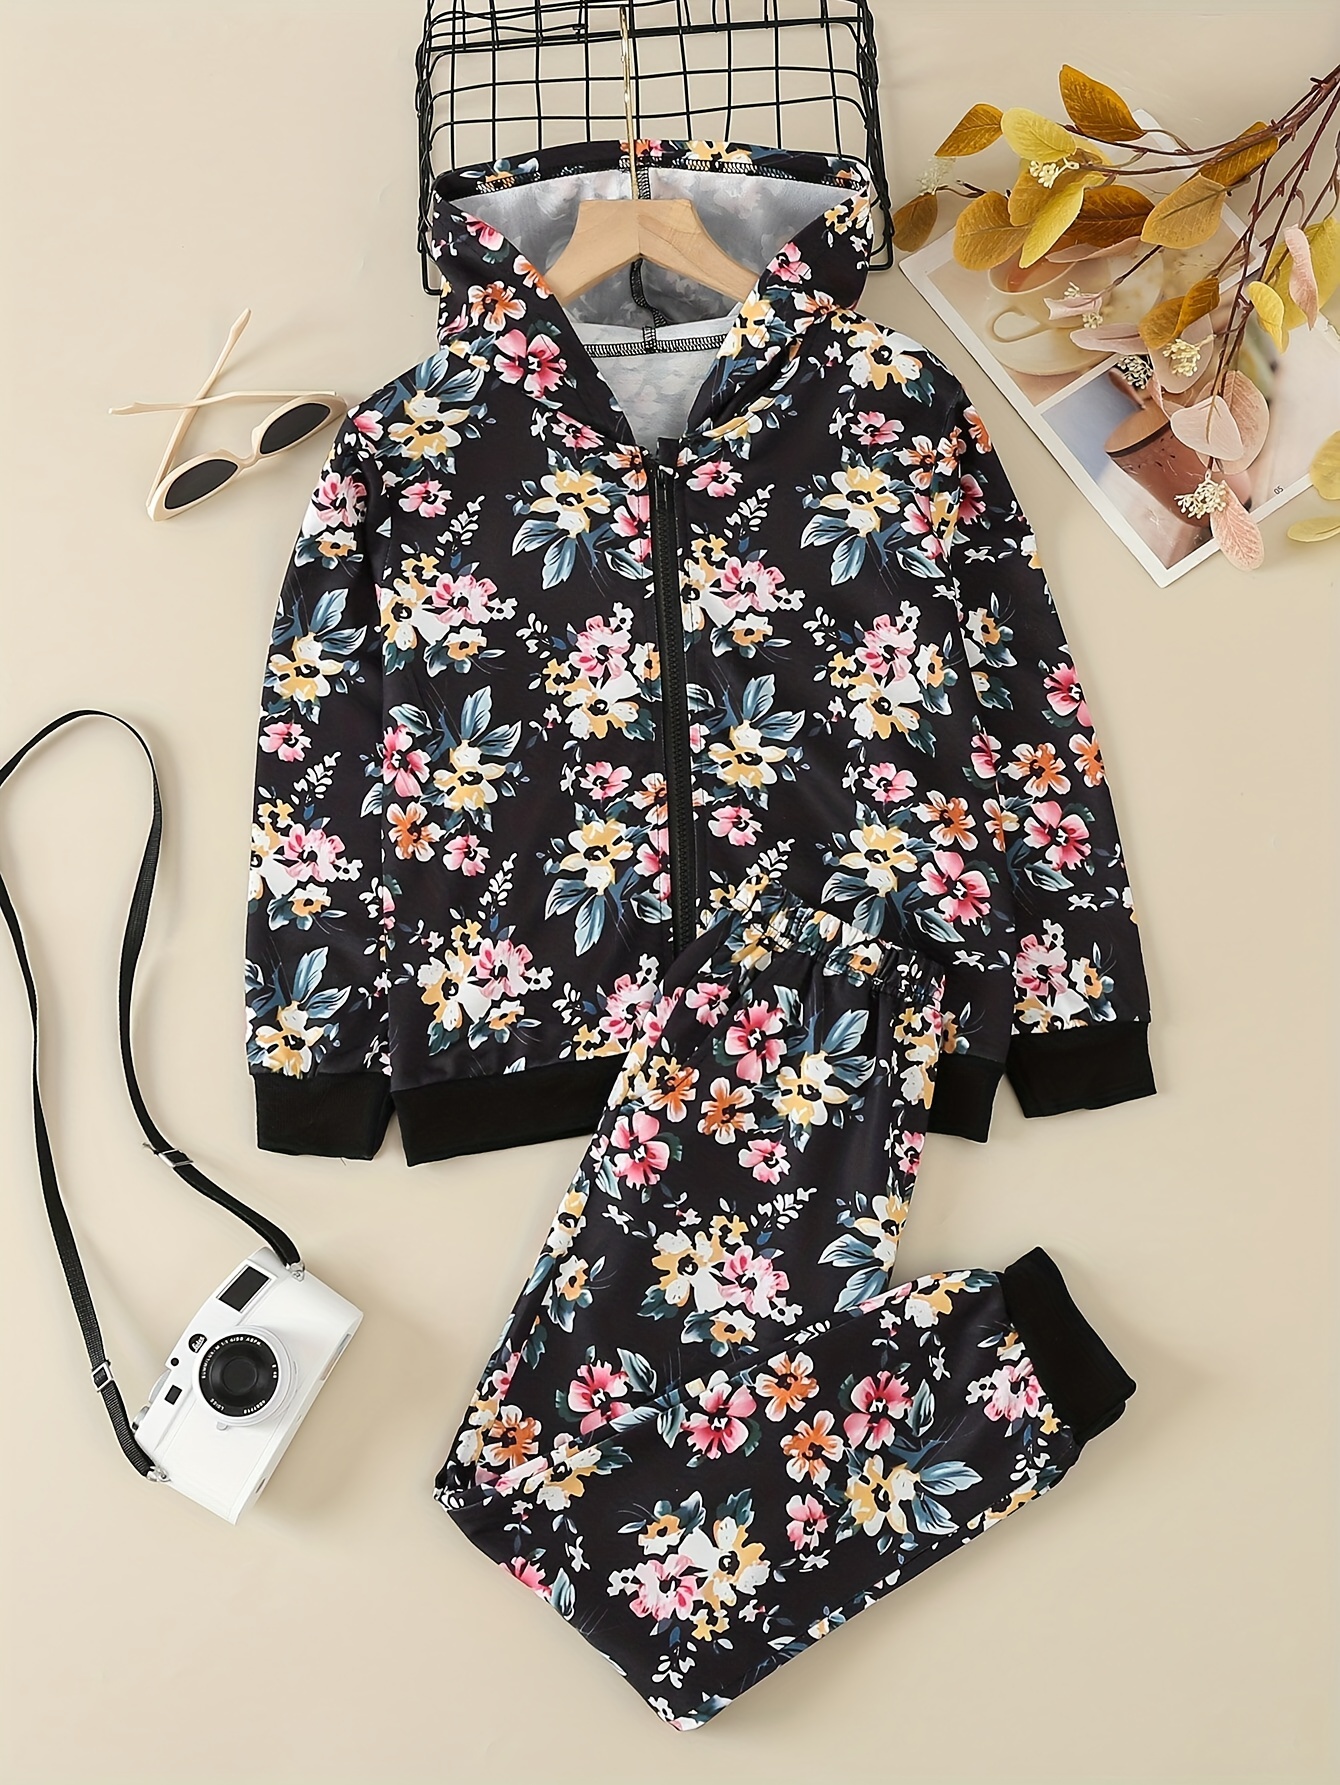 2-piece Toddler Girl Butterfly/Floral Print Colorblock Zipper Bomber Jacket and Elasticized Pants Set